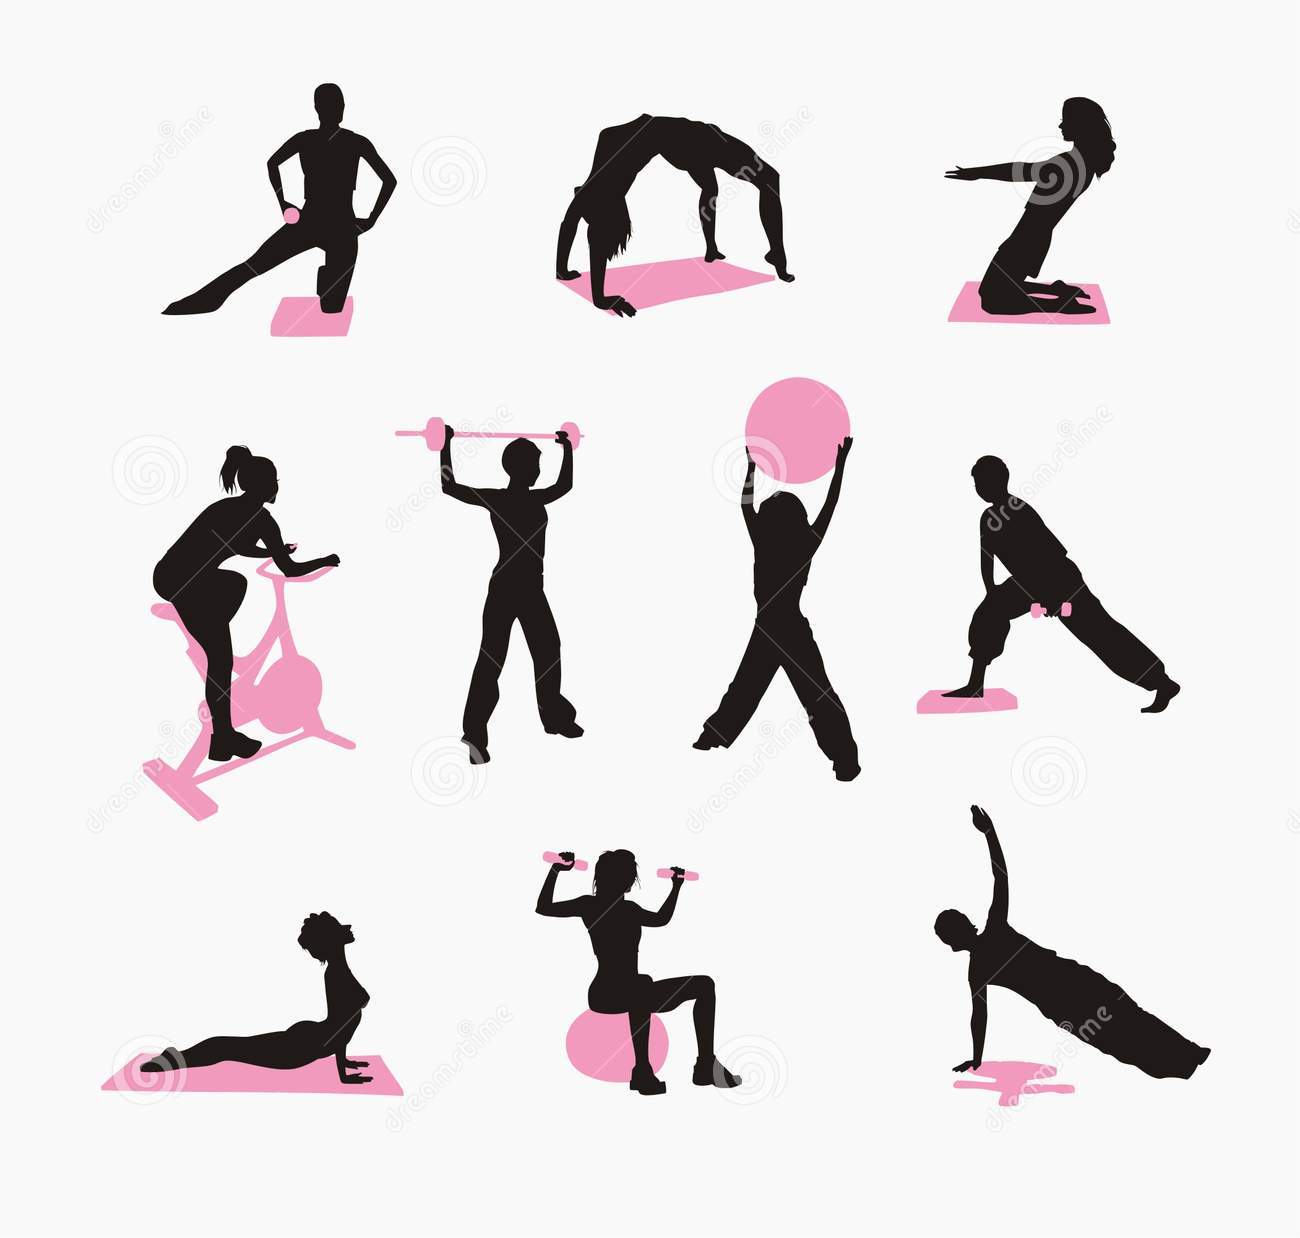 Workout clip art image. Exercise clipart exercise routine